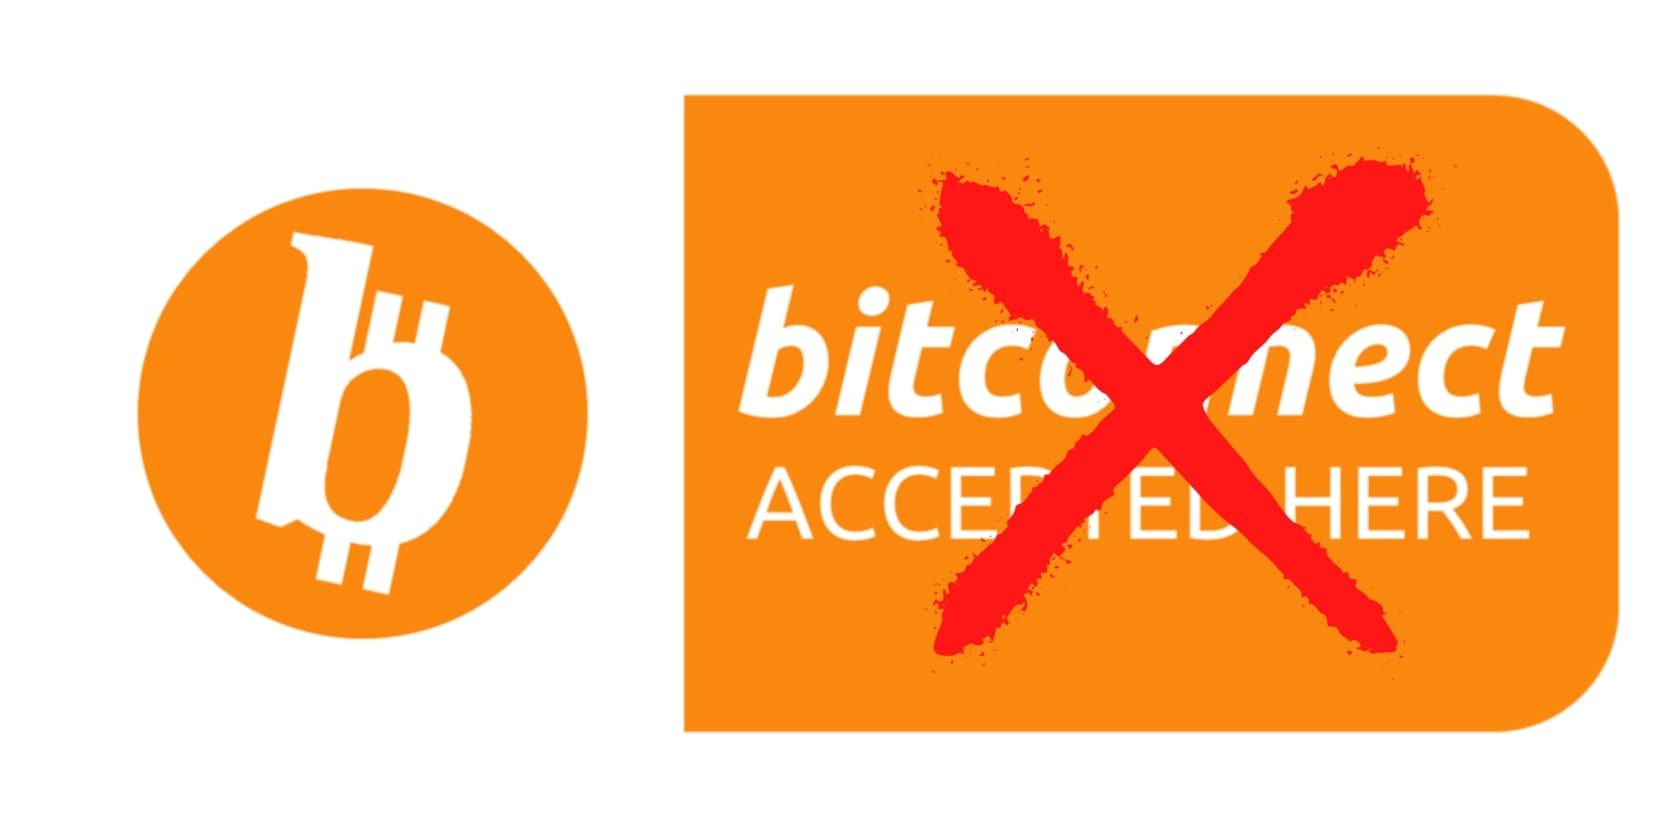 What Happened To BitConnect? Here's Why It Shut Down